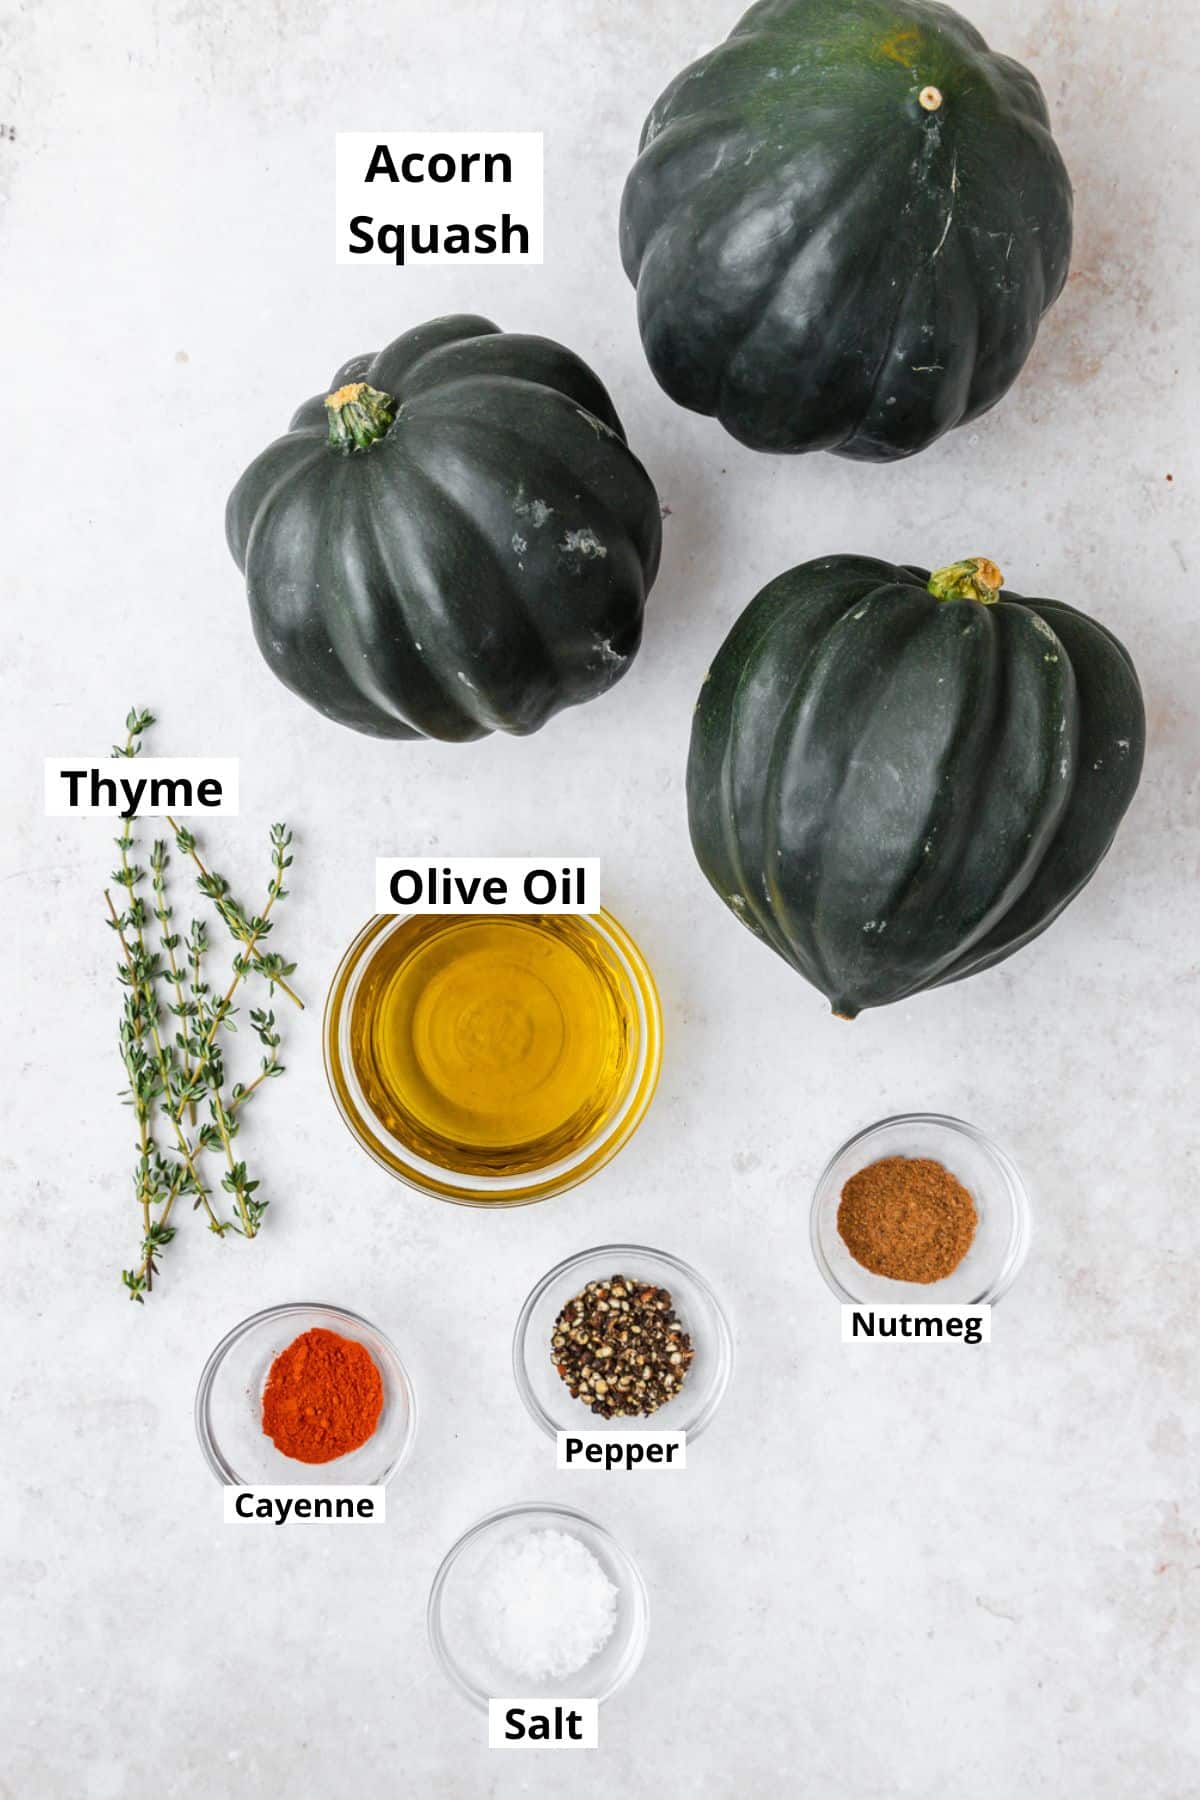 labeled ingredients for roasted acorn squash.